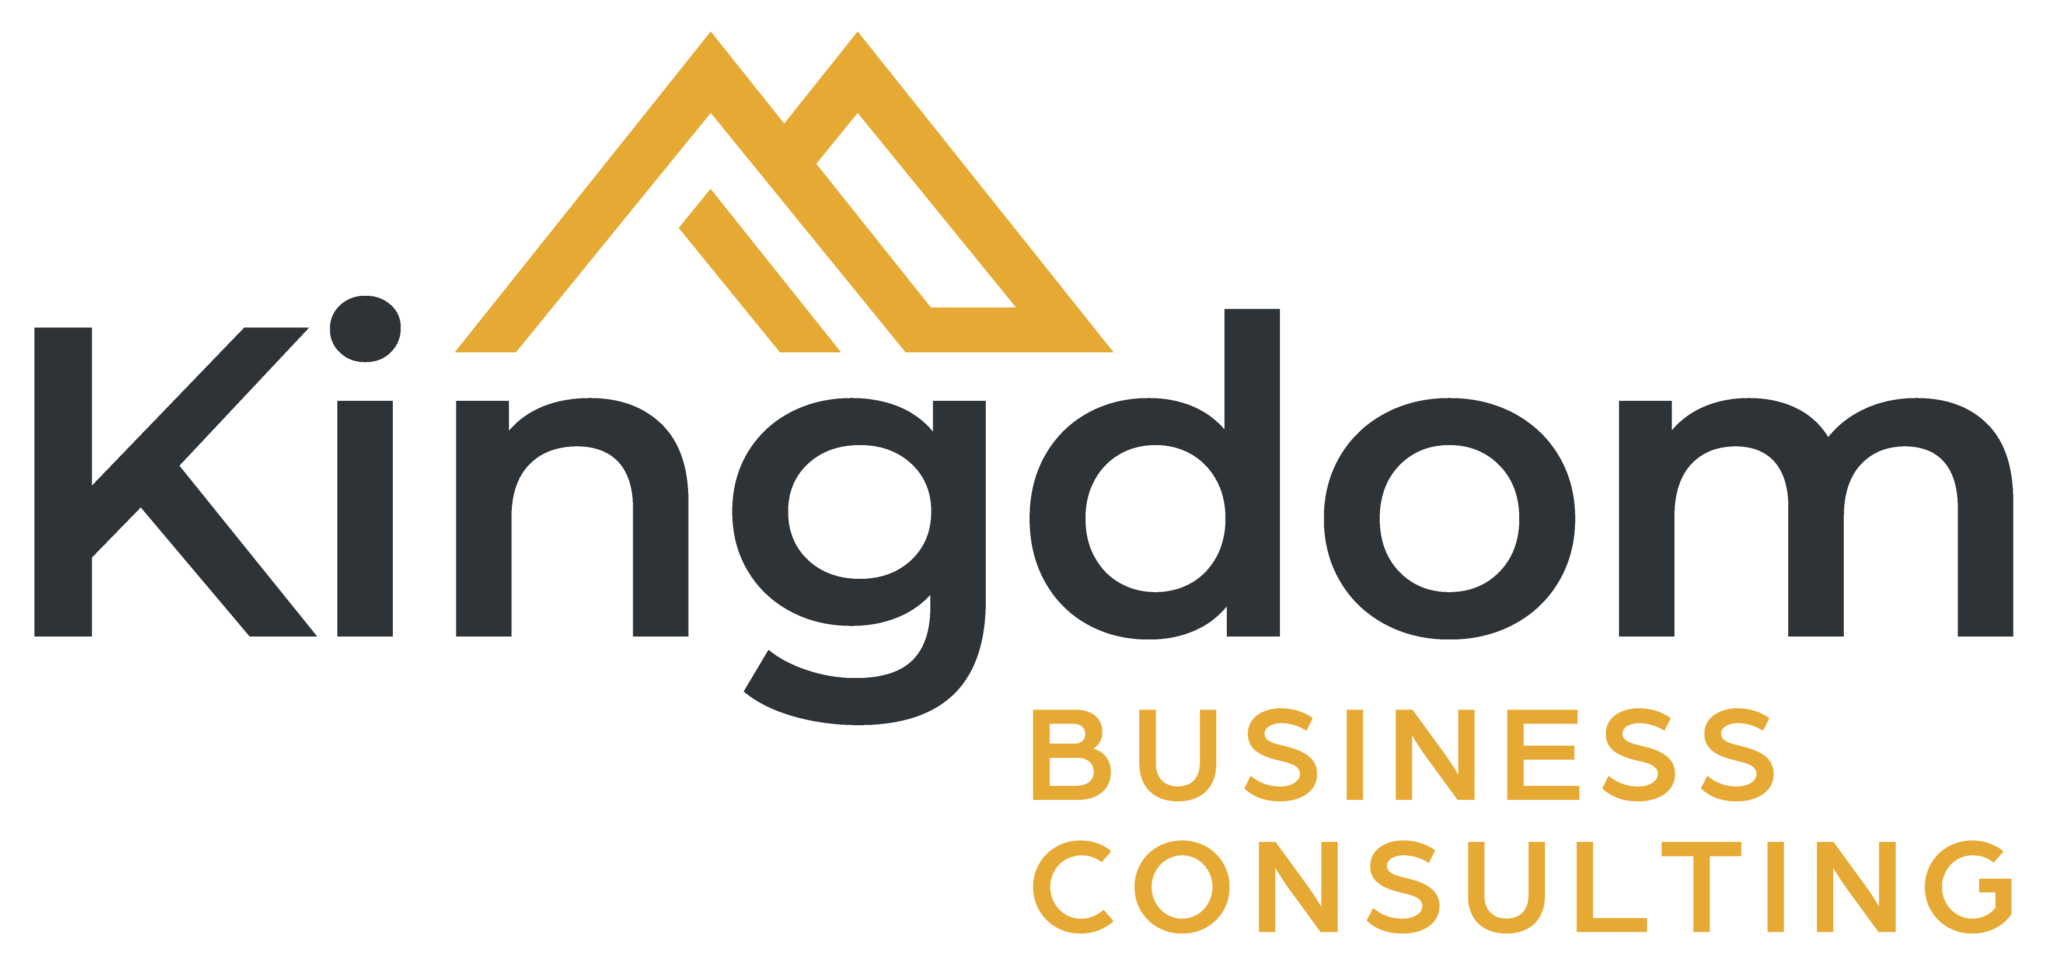 Kingdom business consulting logo invert 2048x965